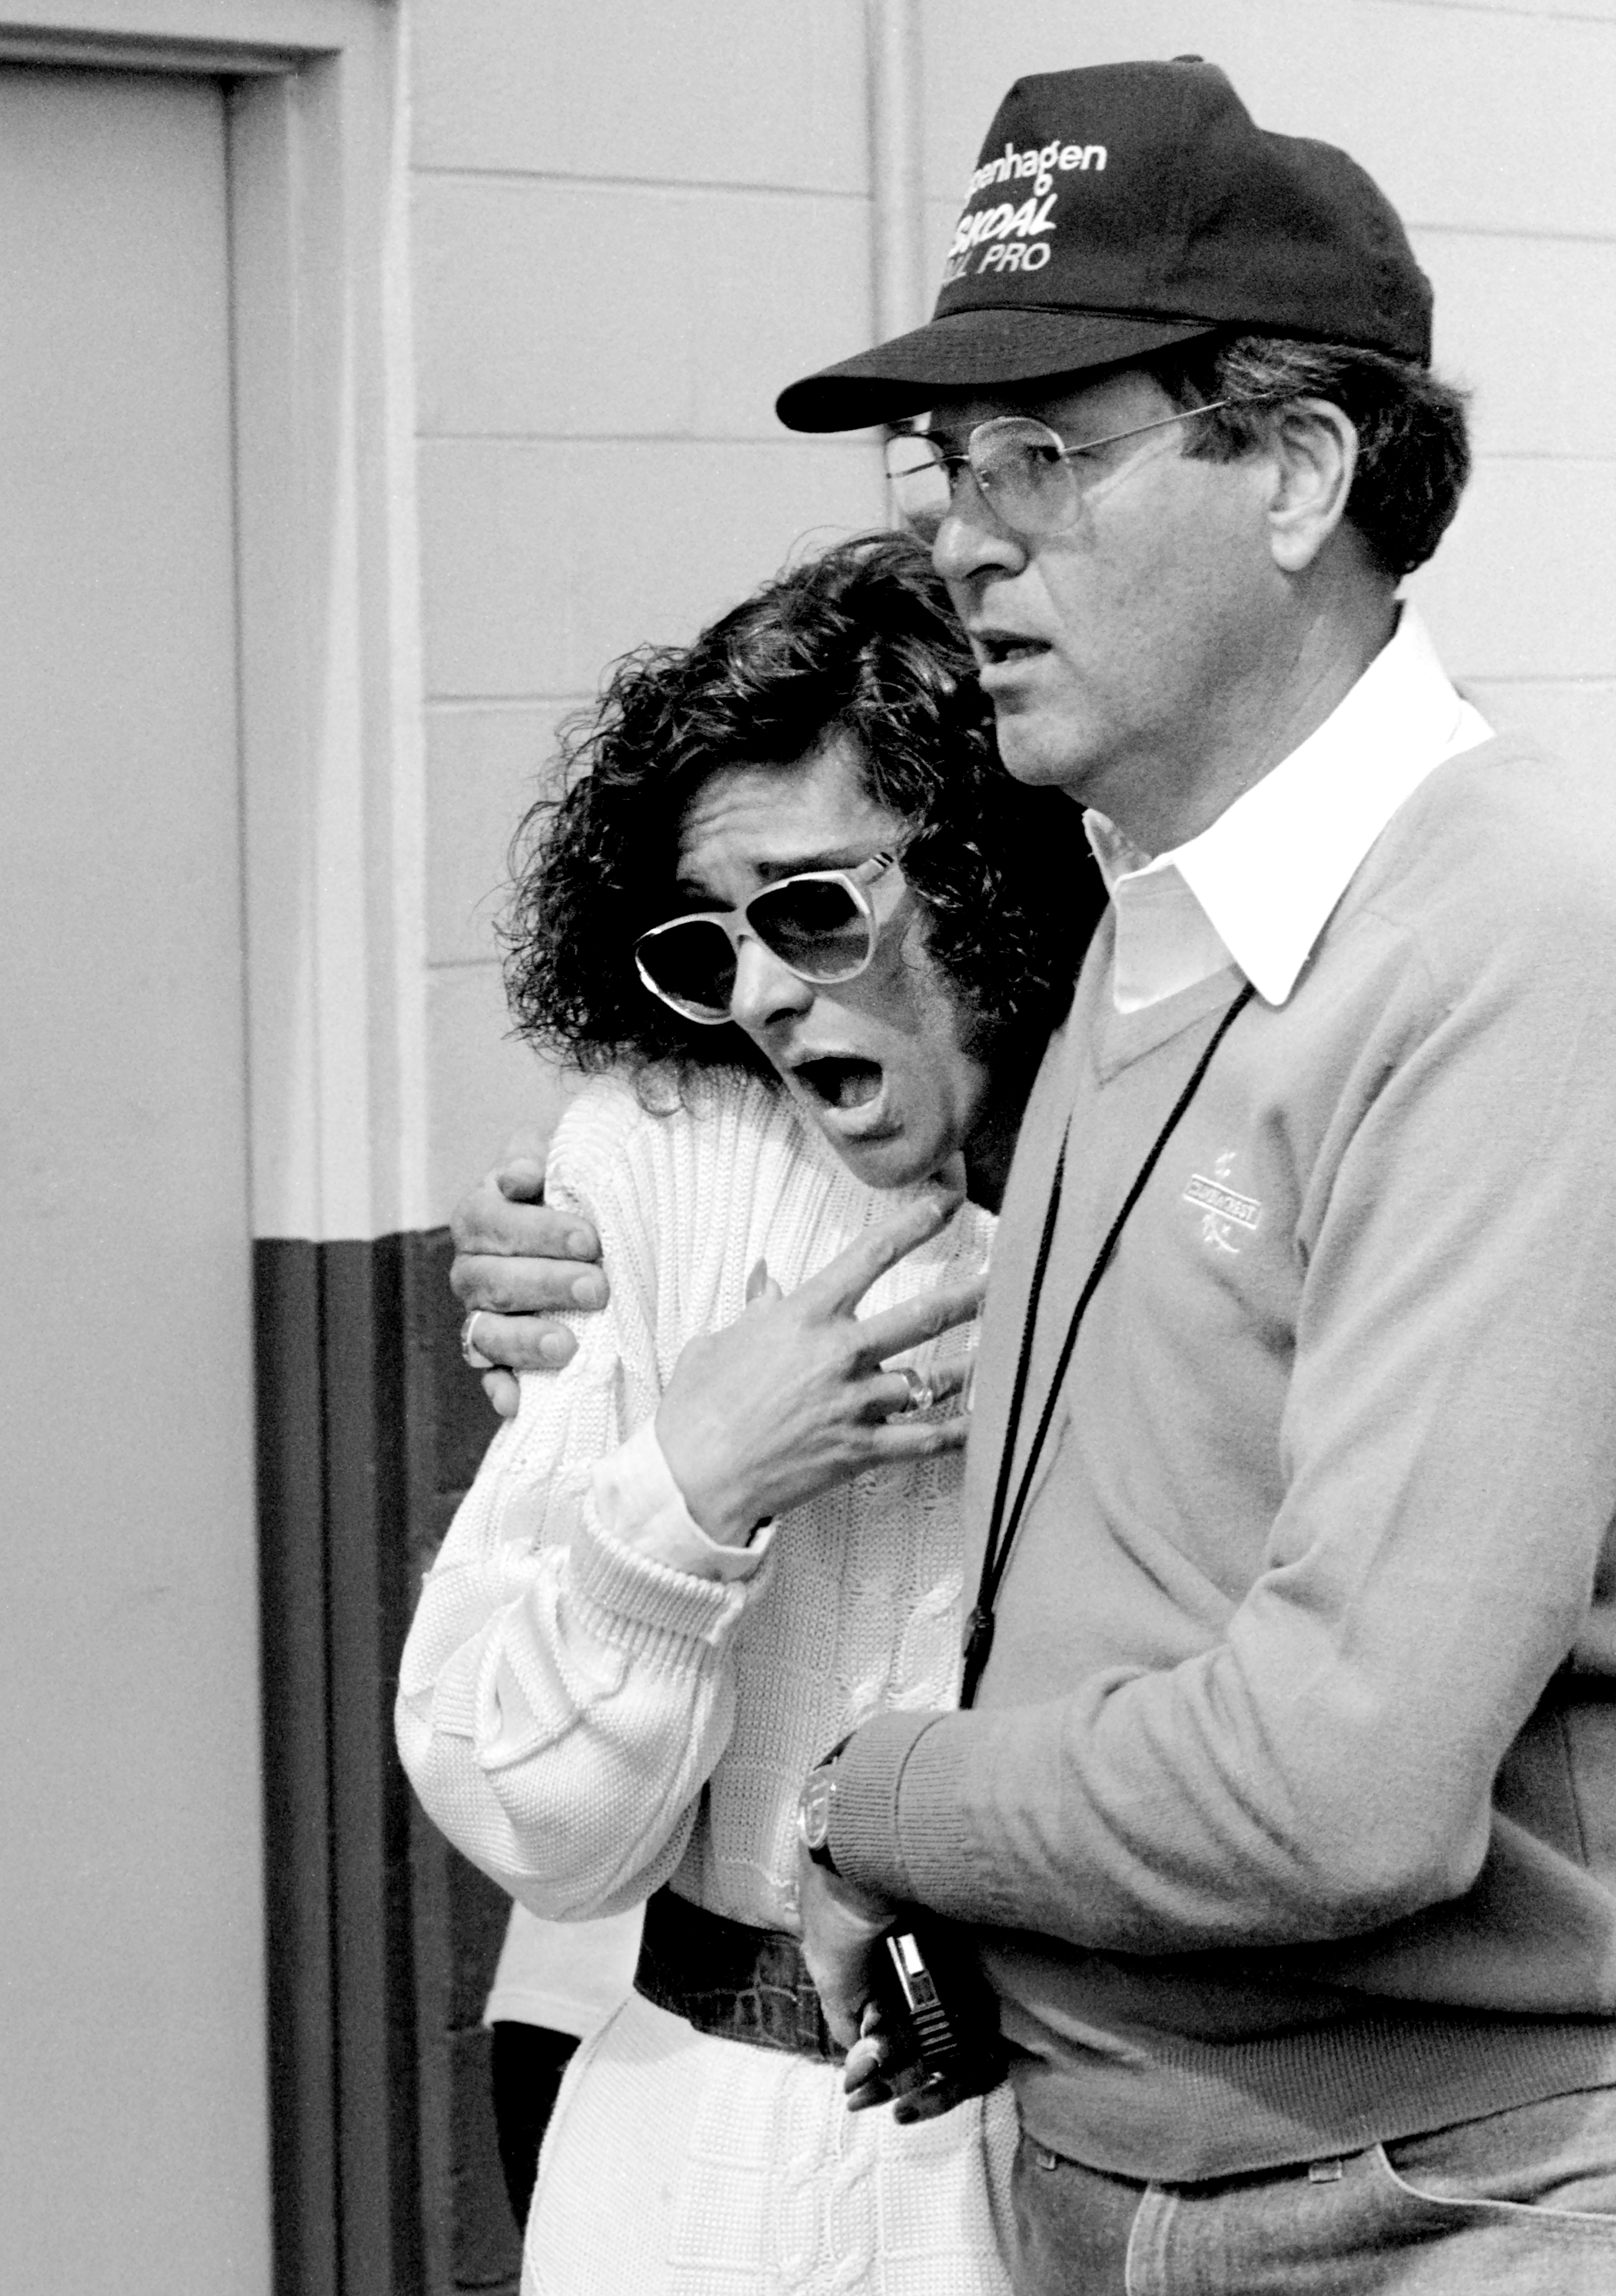 Pattie Petty is escorted by Johnny Hayes to the infield medical center after NASCAR driver Richard Petty, was involved in a crash during the running of the 1988 Daytona 500 stock car race at Daytona International Speedway in Daytona Beach, Florida, on February 01, 1988. | Source: Getty Images